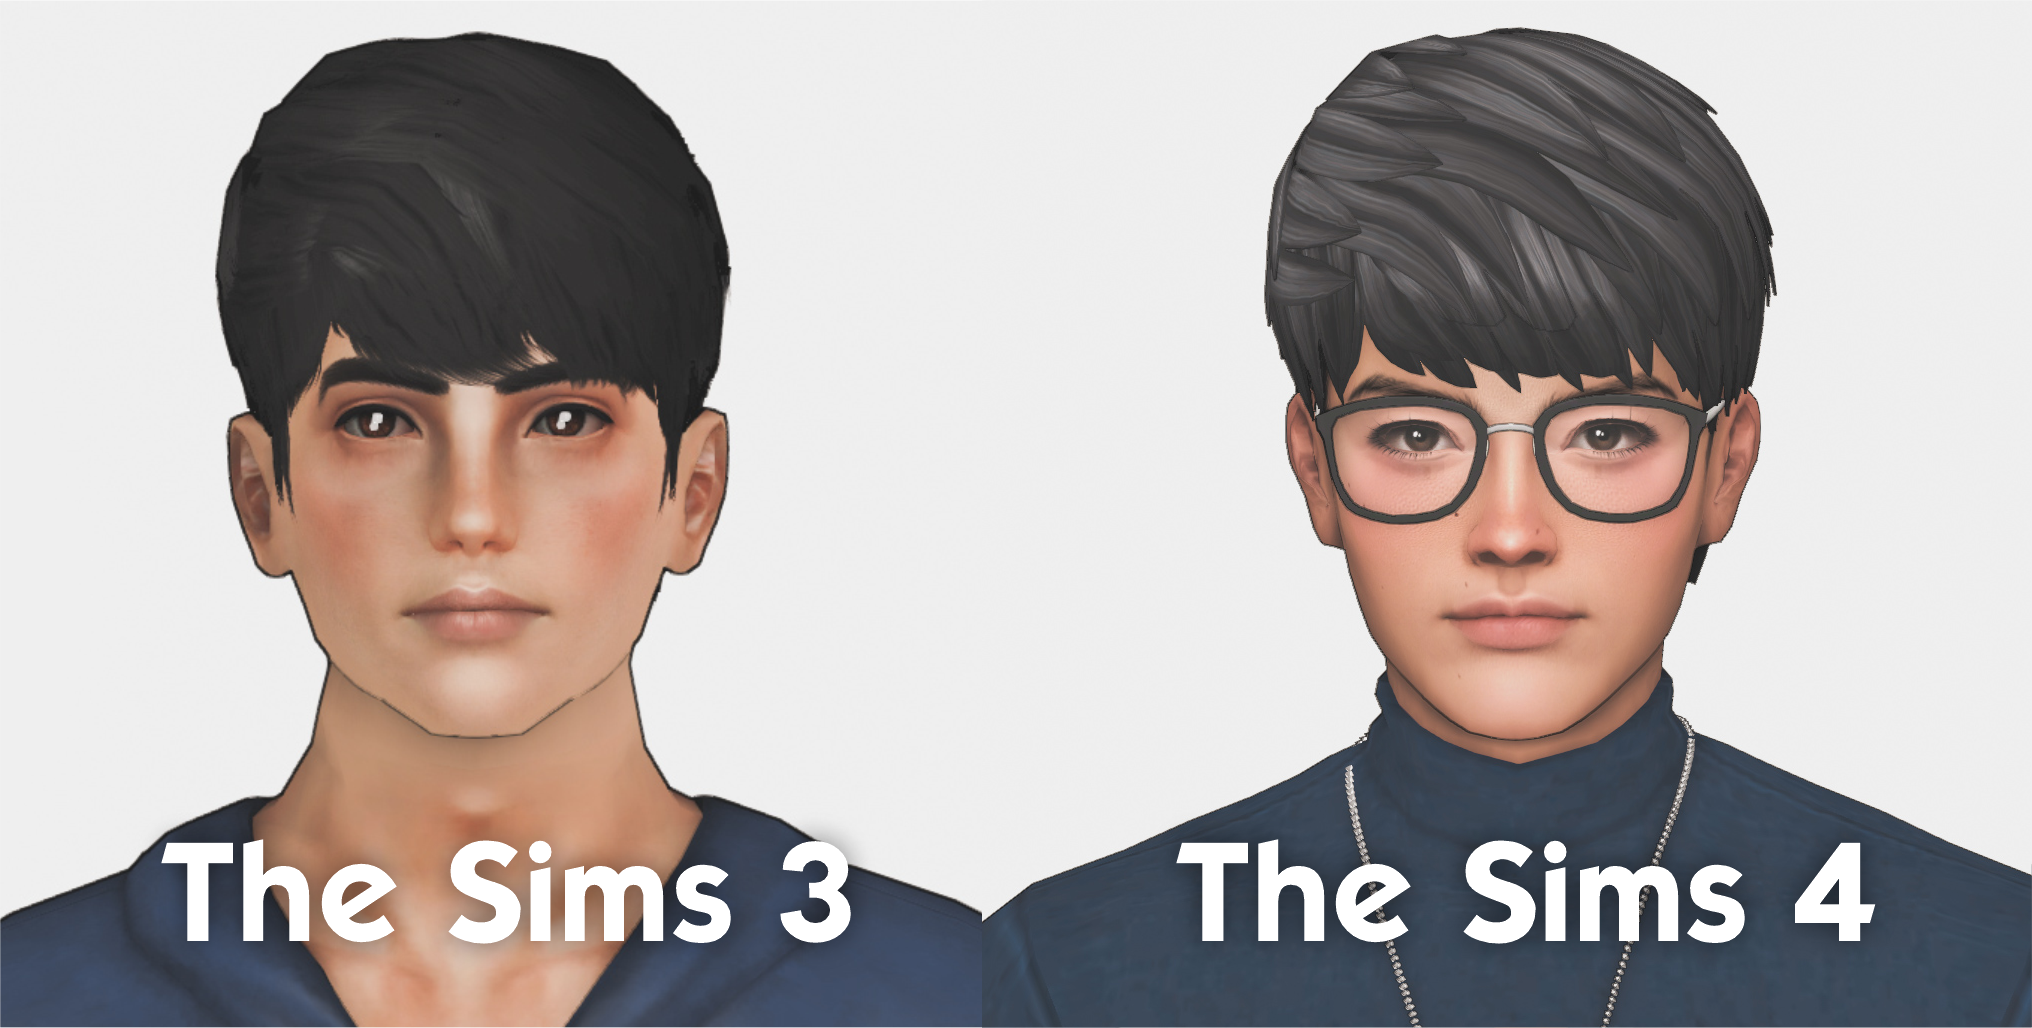 Download Atlas Hair (TS3 to TS4) - The Sims 4 Mods - CurseForge